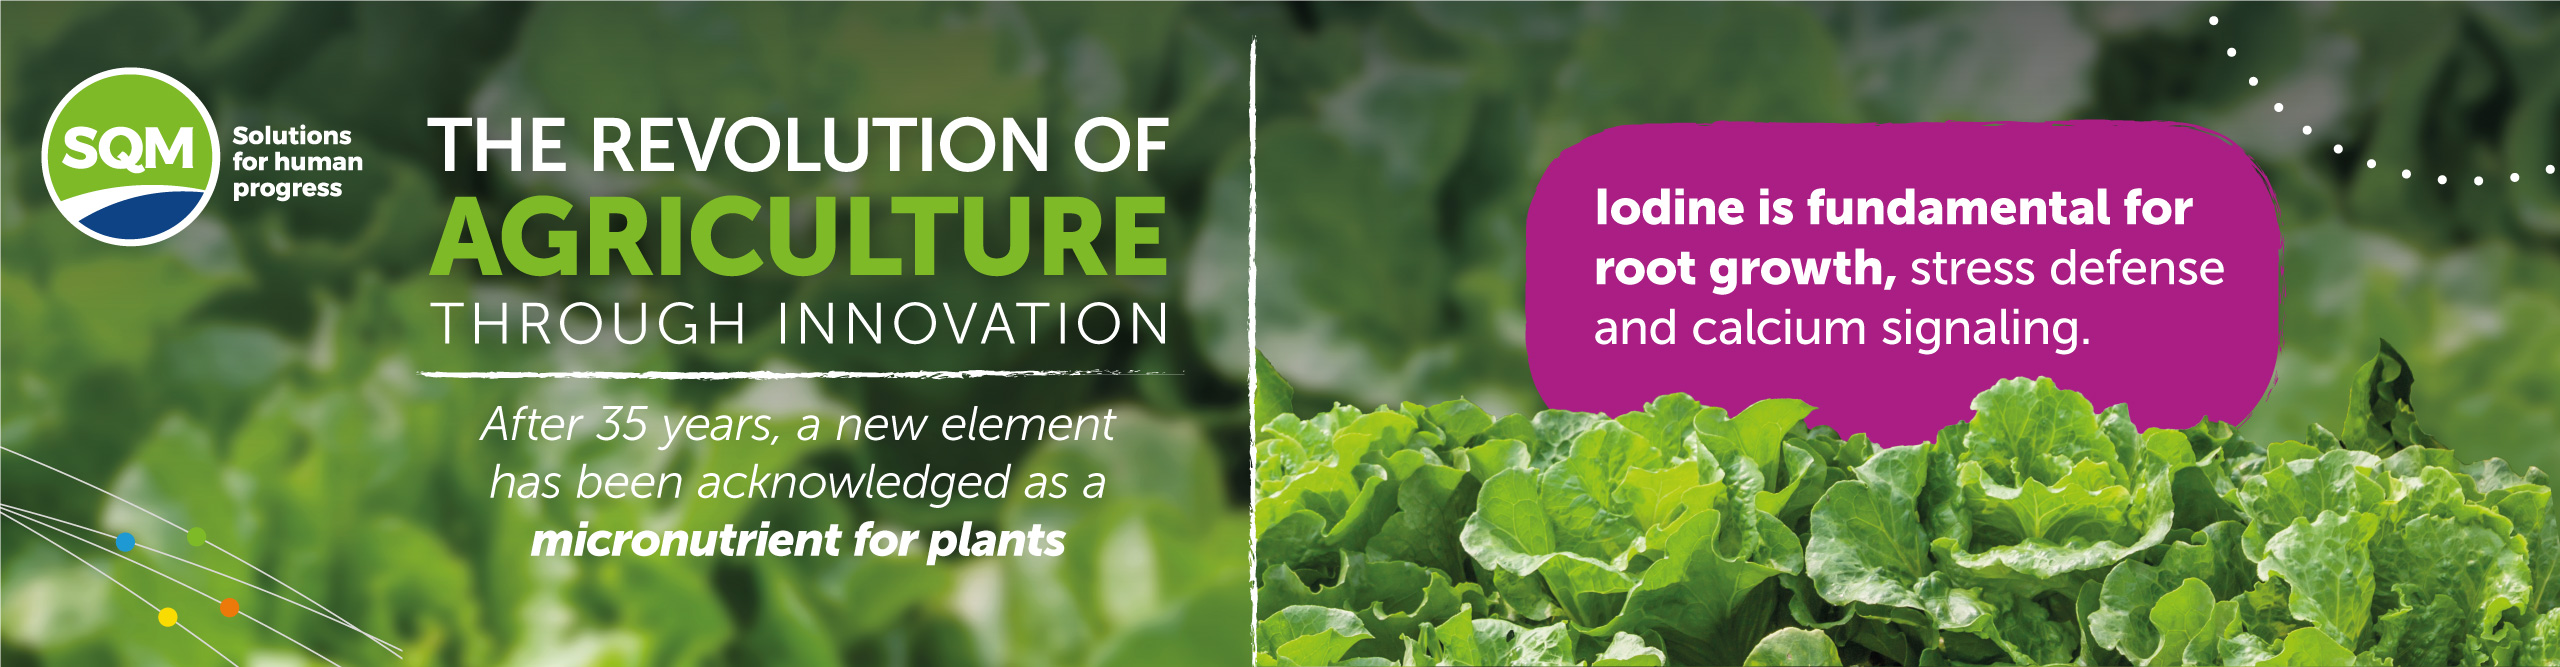 The revolution of agriculture through innovation